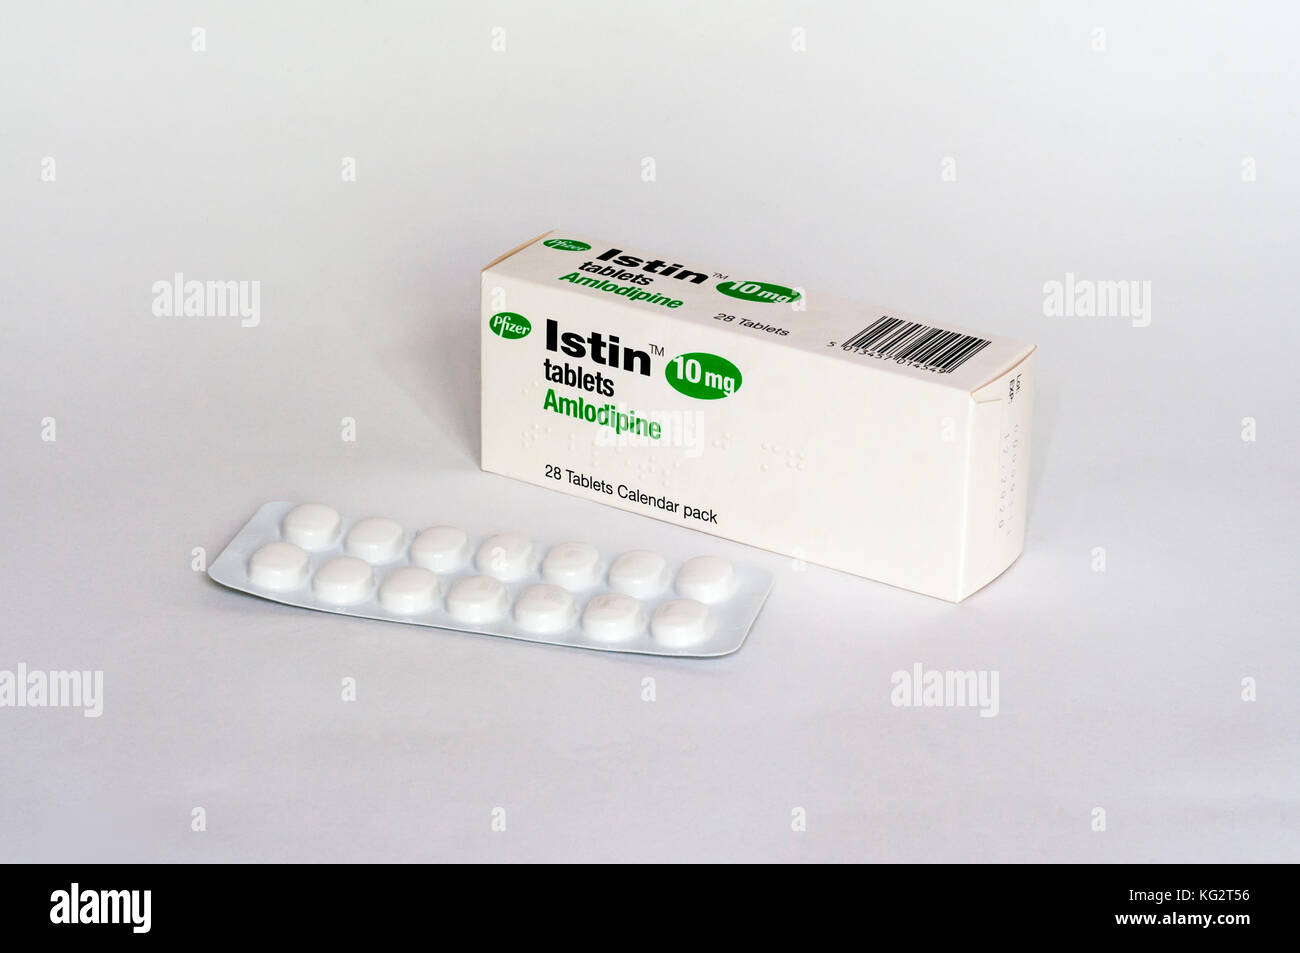 A box of Amlodipine tablets used to treat high blood pressure and coronary artery disease Stock Photo